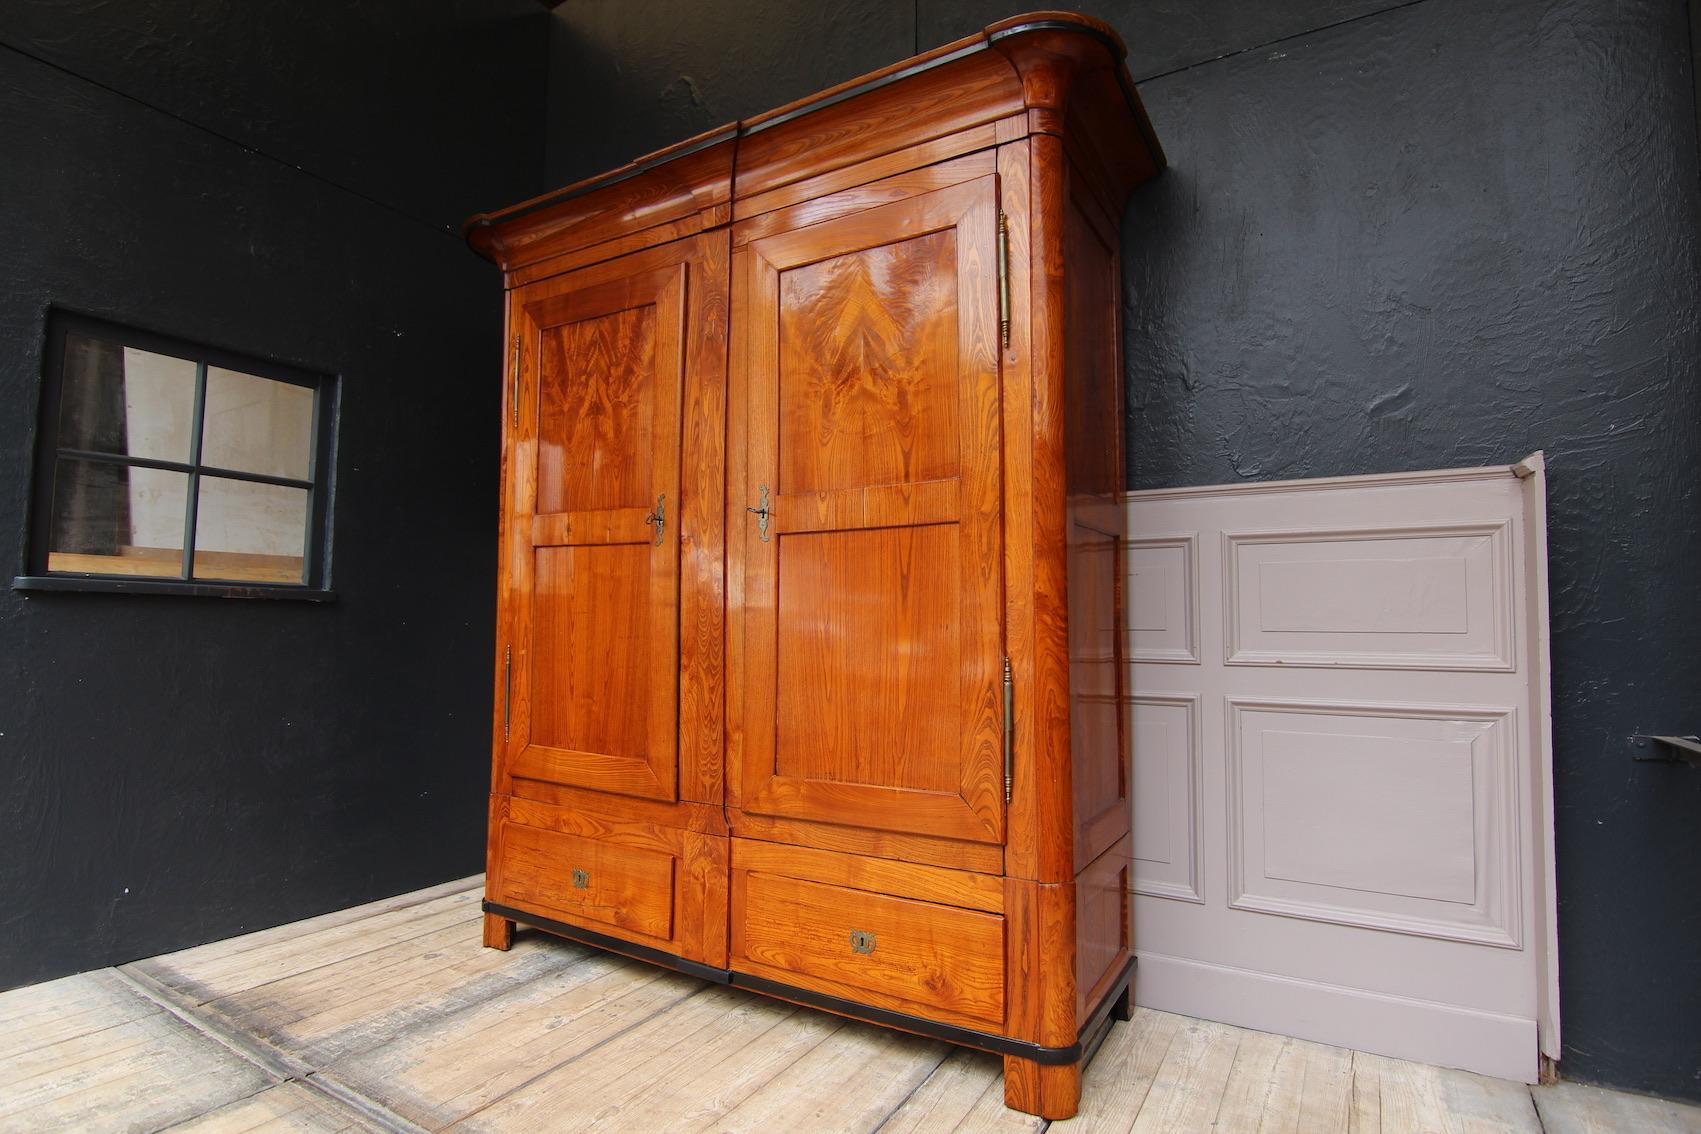 Biedermeier wardrobe made of ash wood. 1st half of the 19th century.
2-door coffered body with cranked rounded corners and head strip with center console. Base with 2 drawers and a secret compartment in the middle (see photos). Both the cornice and